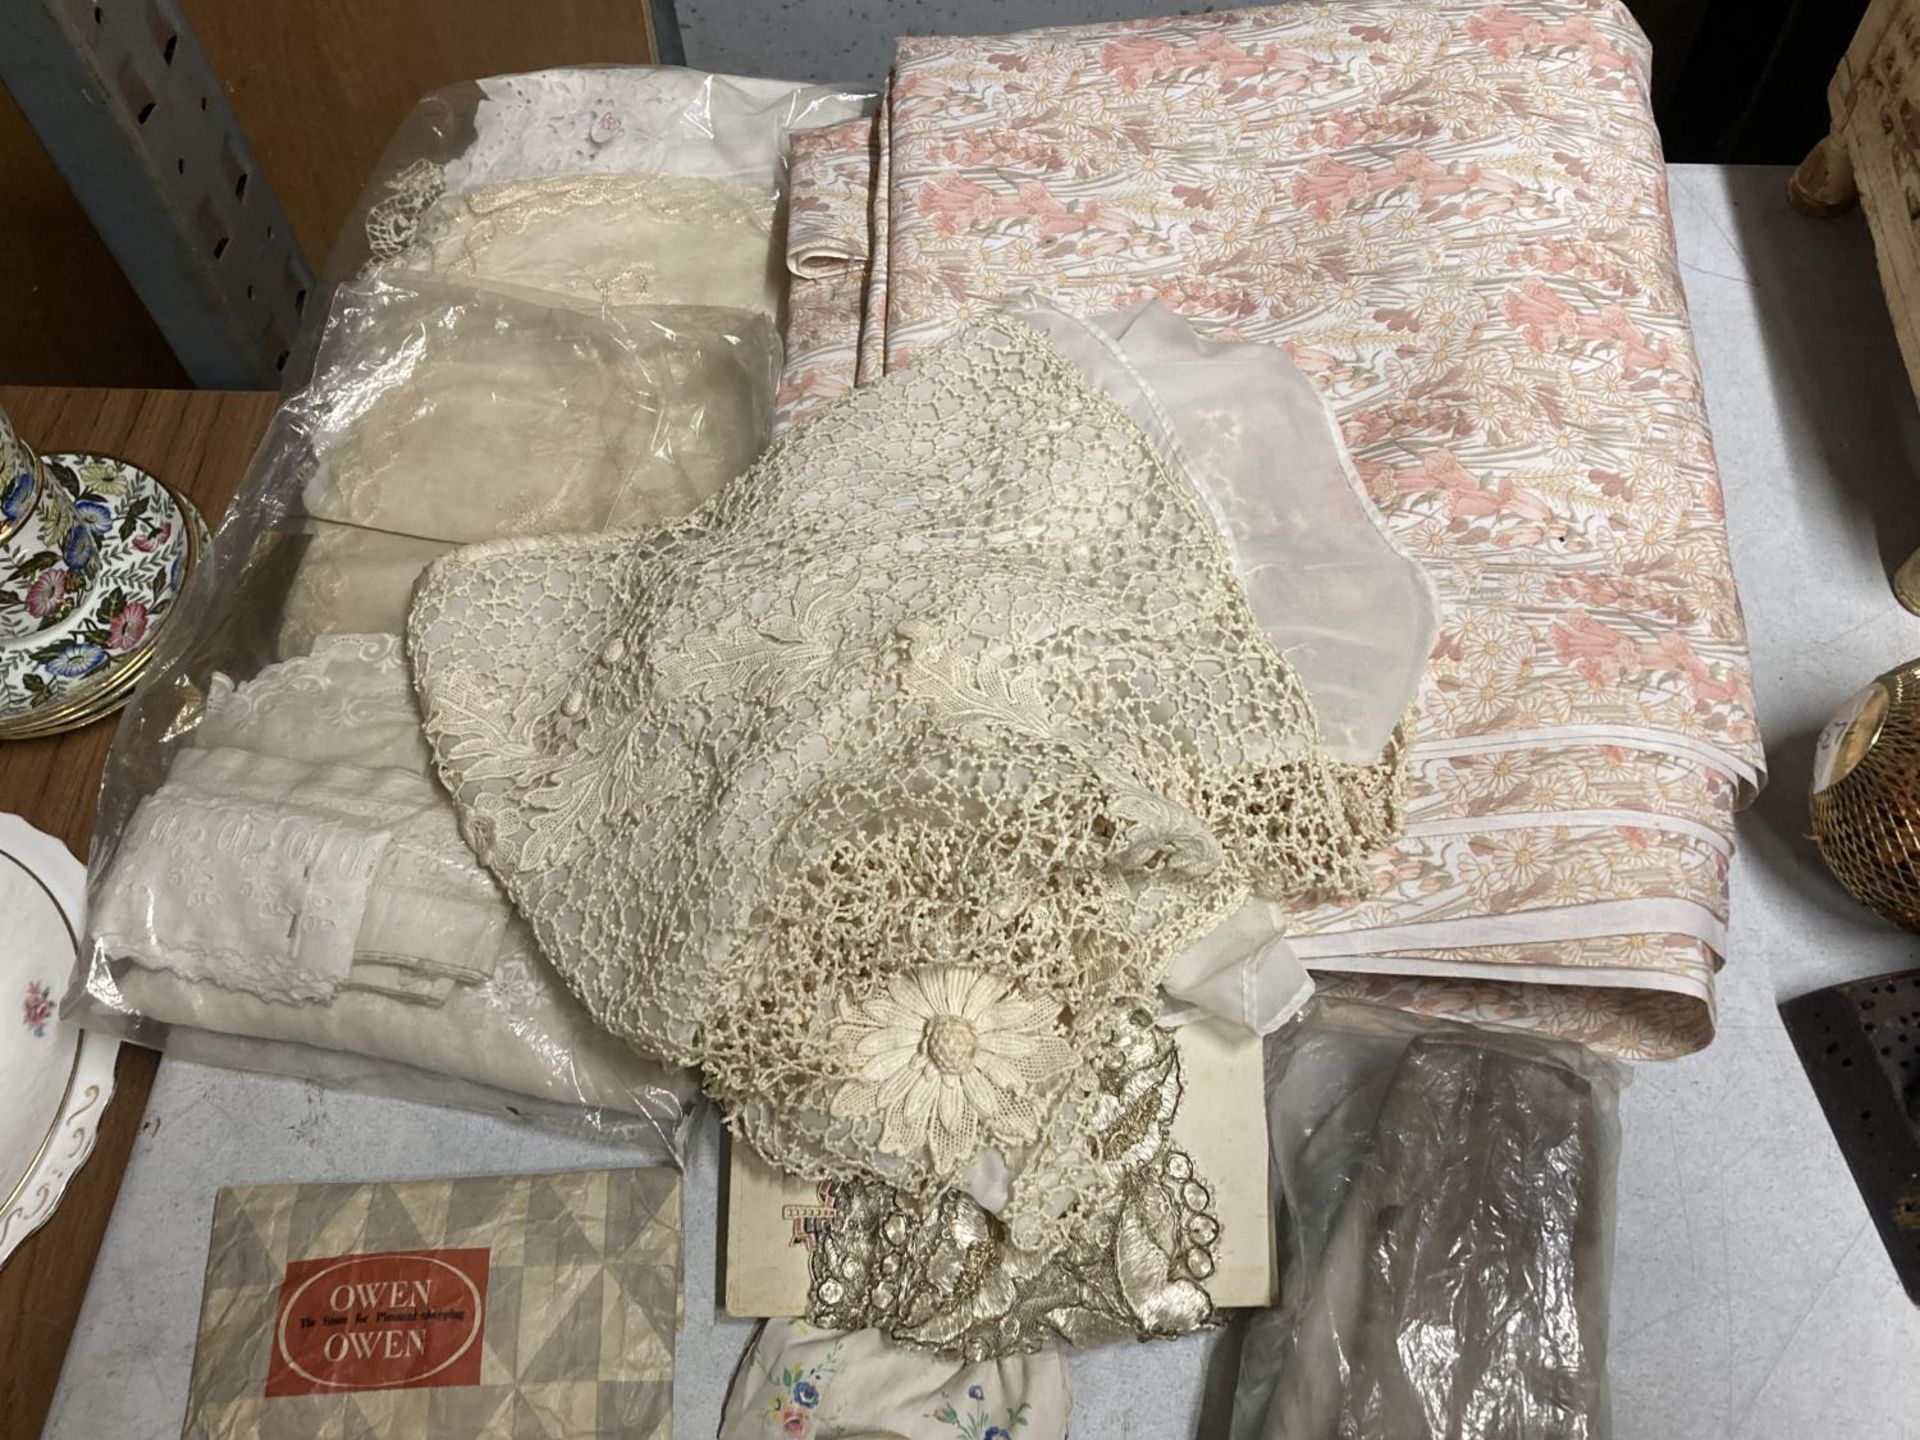 A QUANTITY OF LACE AND MATERIALS - Image 3 of 4